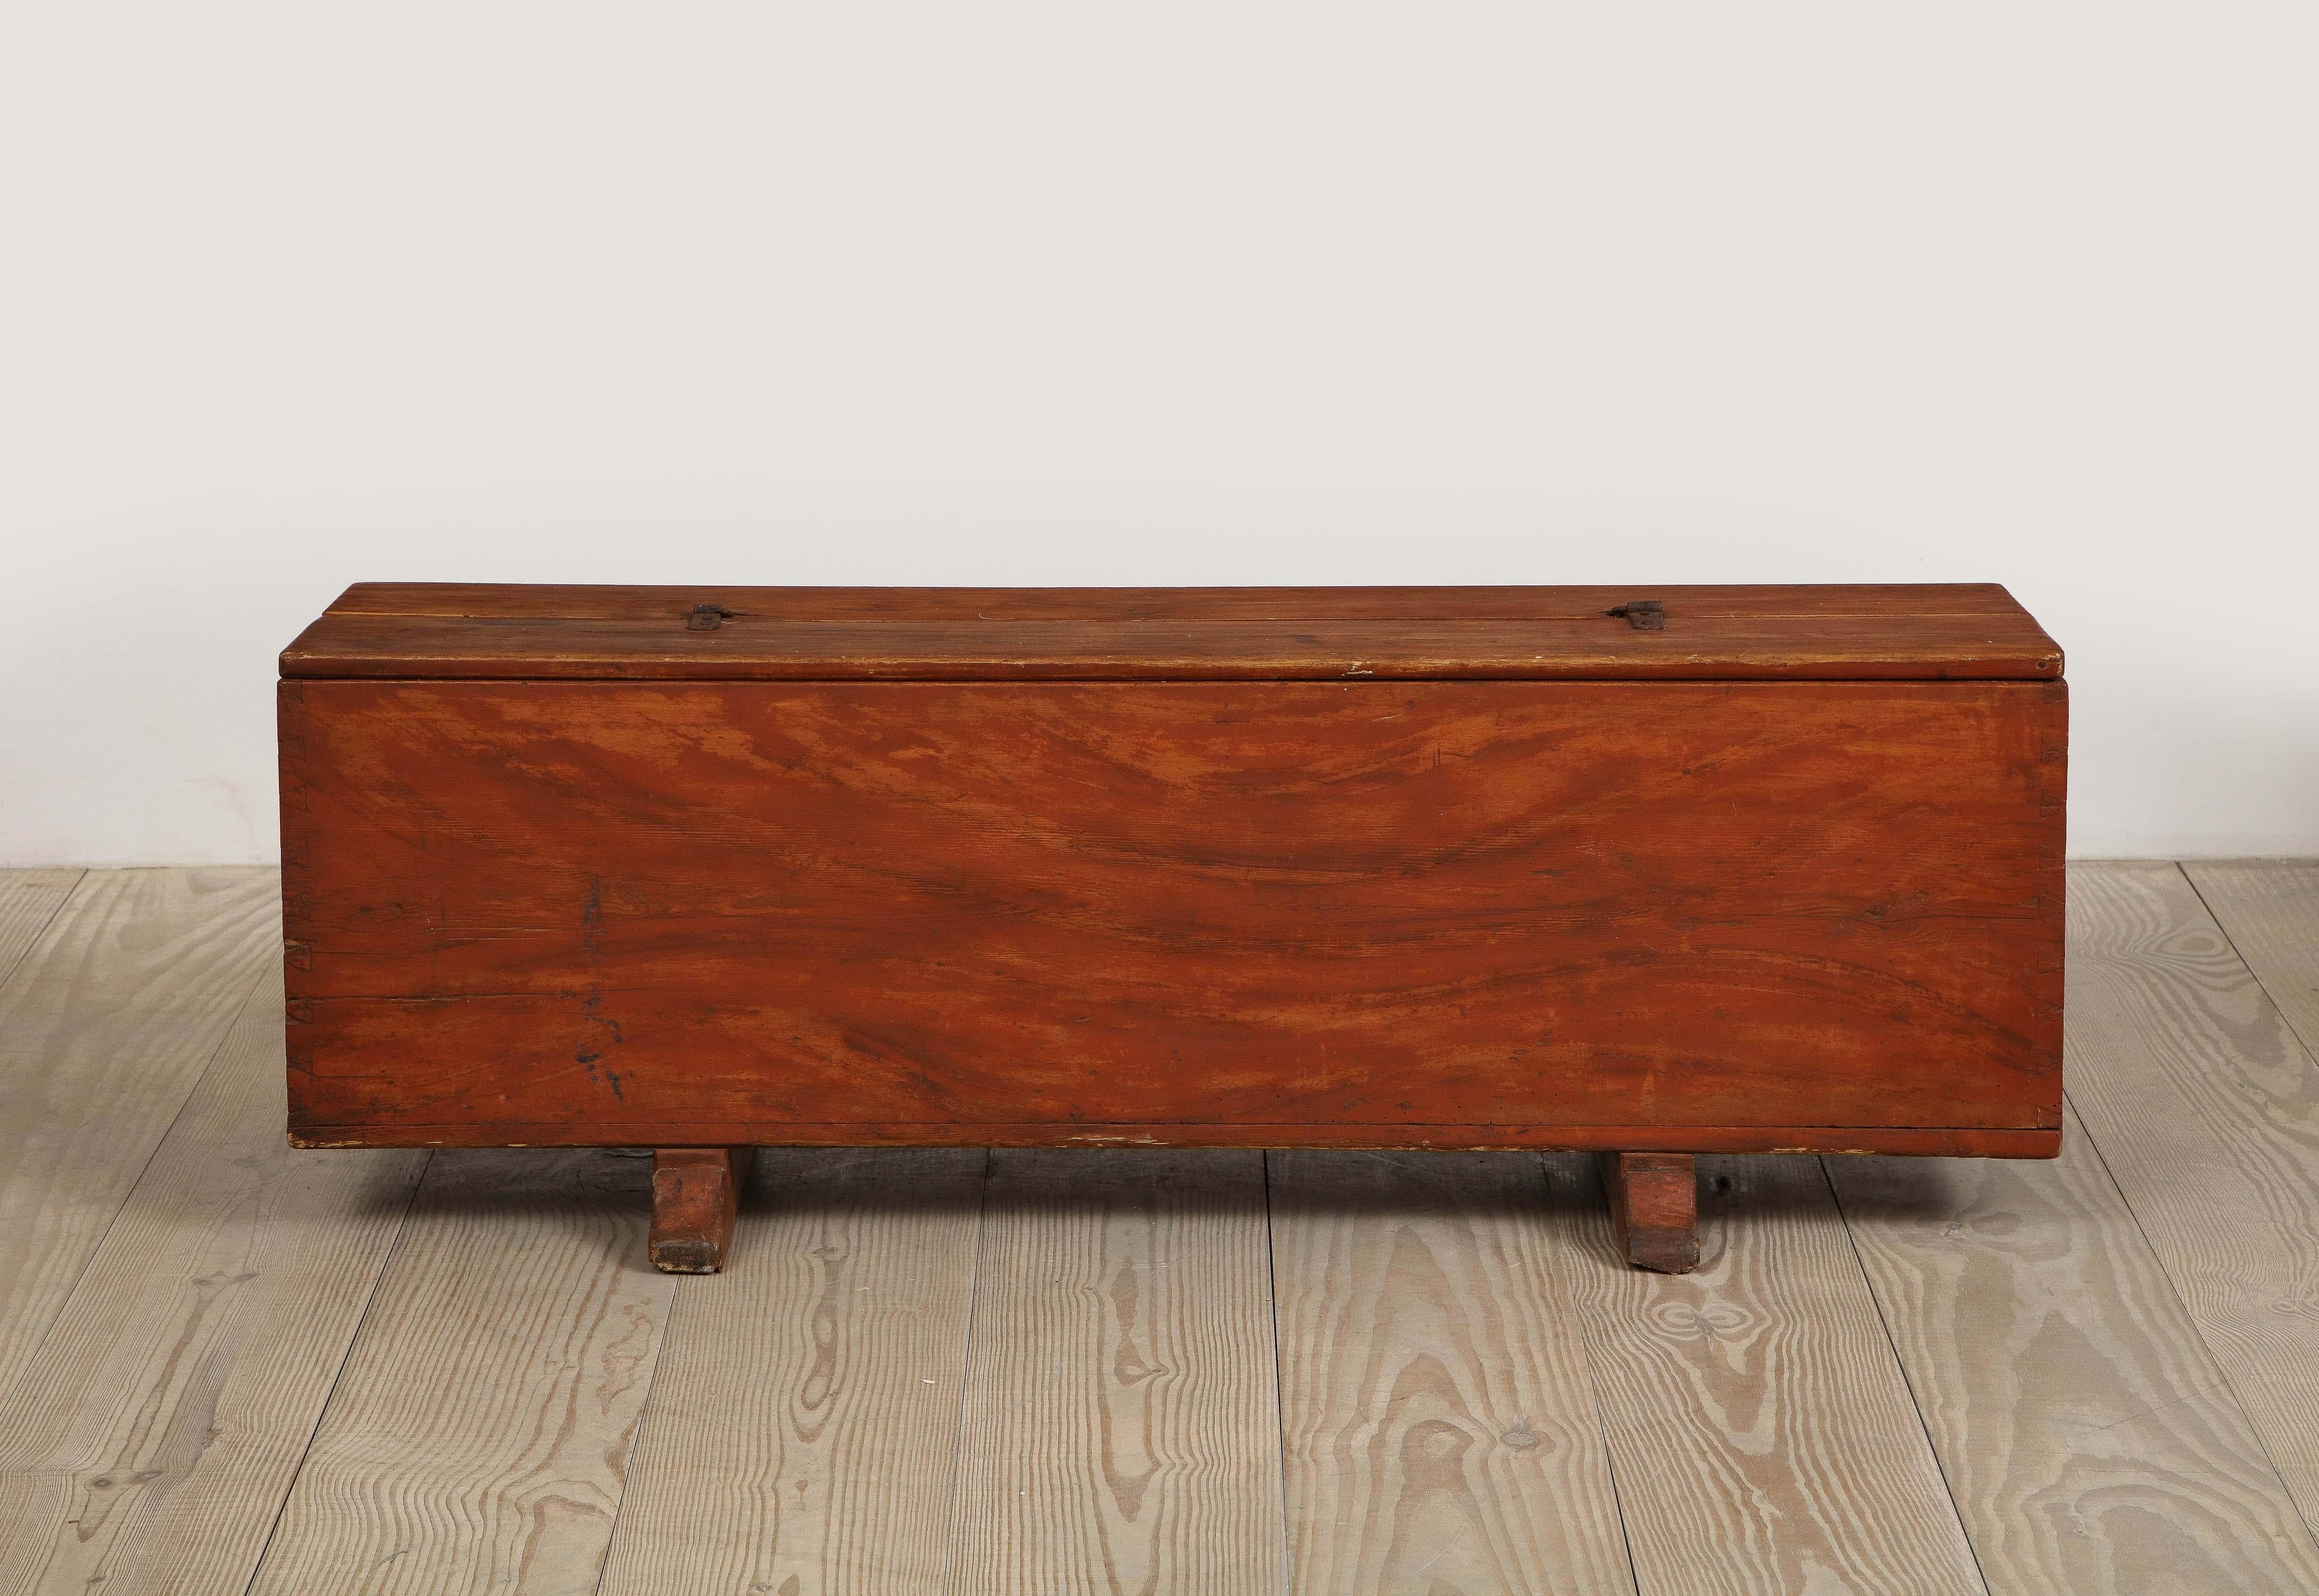 Allmoge Swedish trunk / bench with faux grain painted finish, origin: Sweden, circa 1800.

Great storage and seating. 